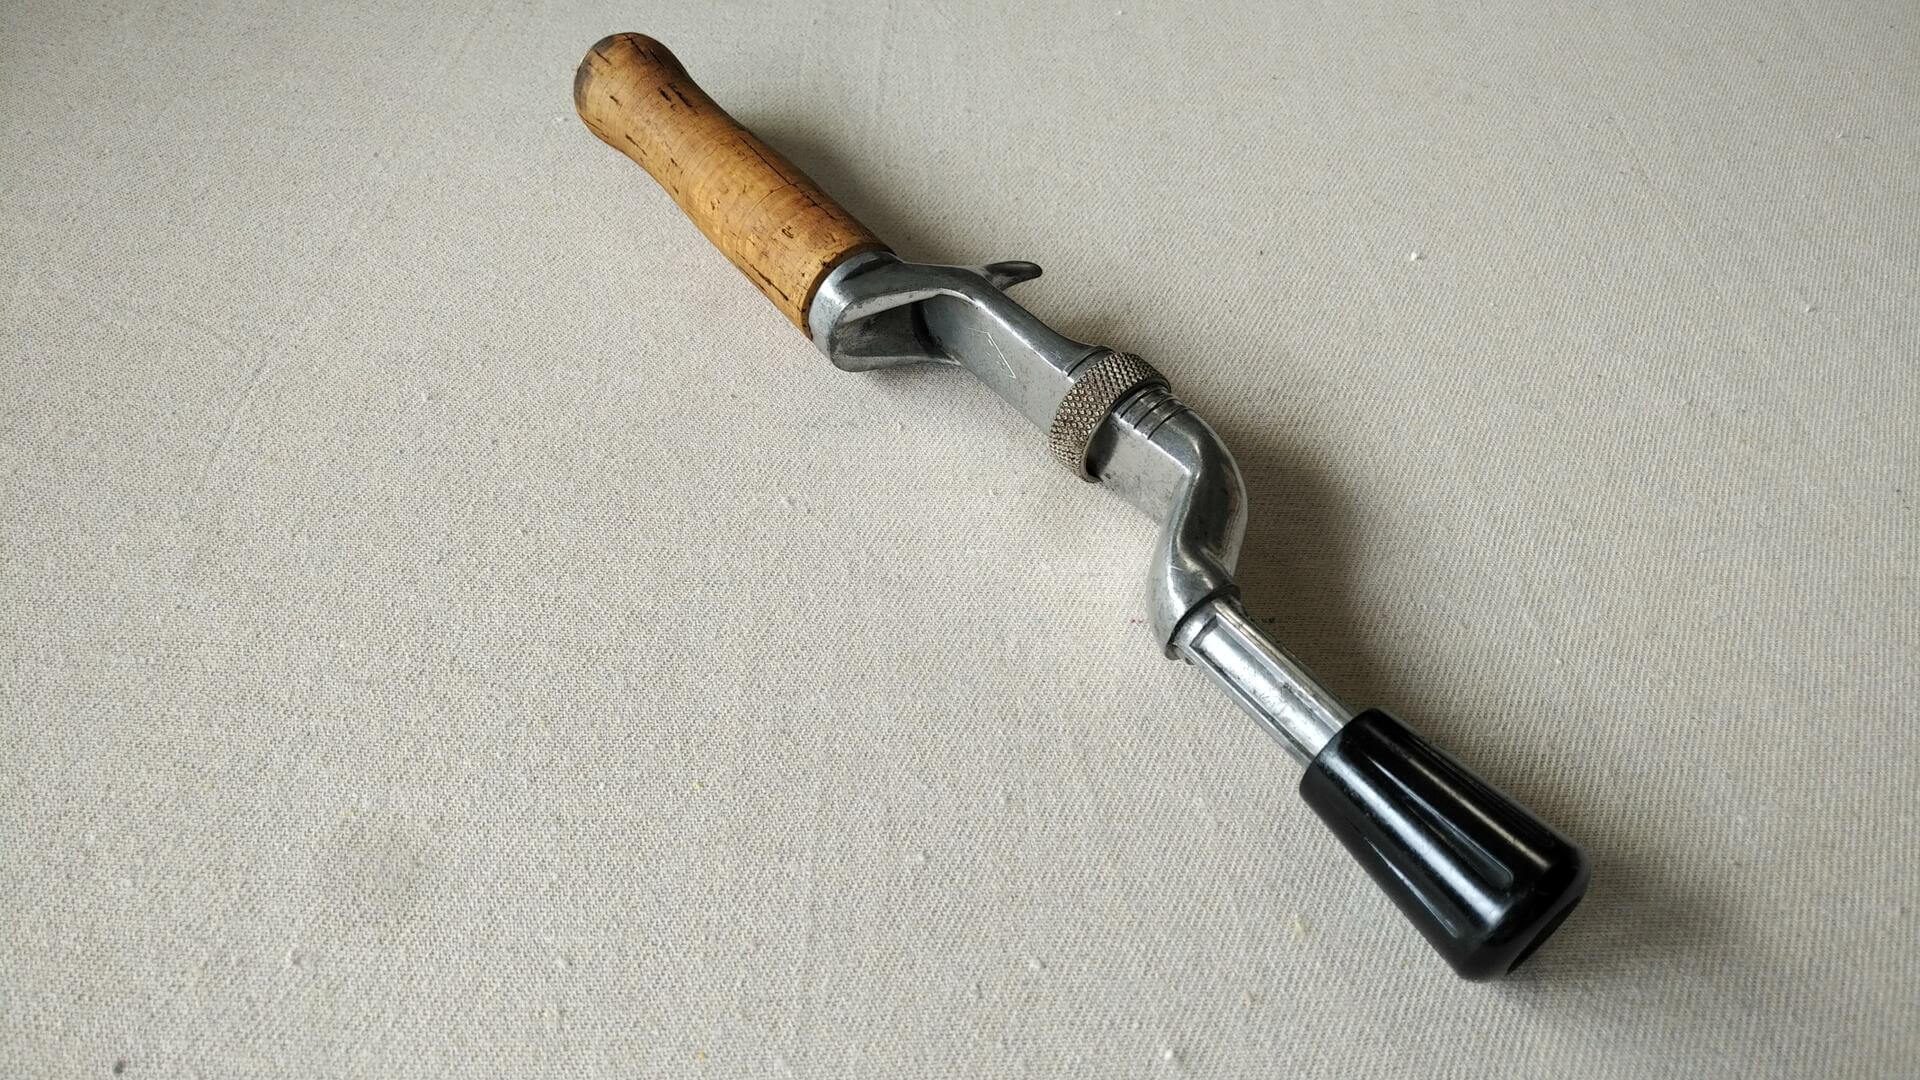 Vintage Dependun brand cast aluminum fishing rod handle with the cork handle. Mid century MCM collectible fishing and outdoors equipment and sporting goods